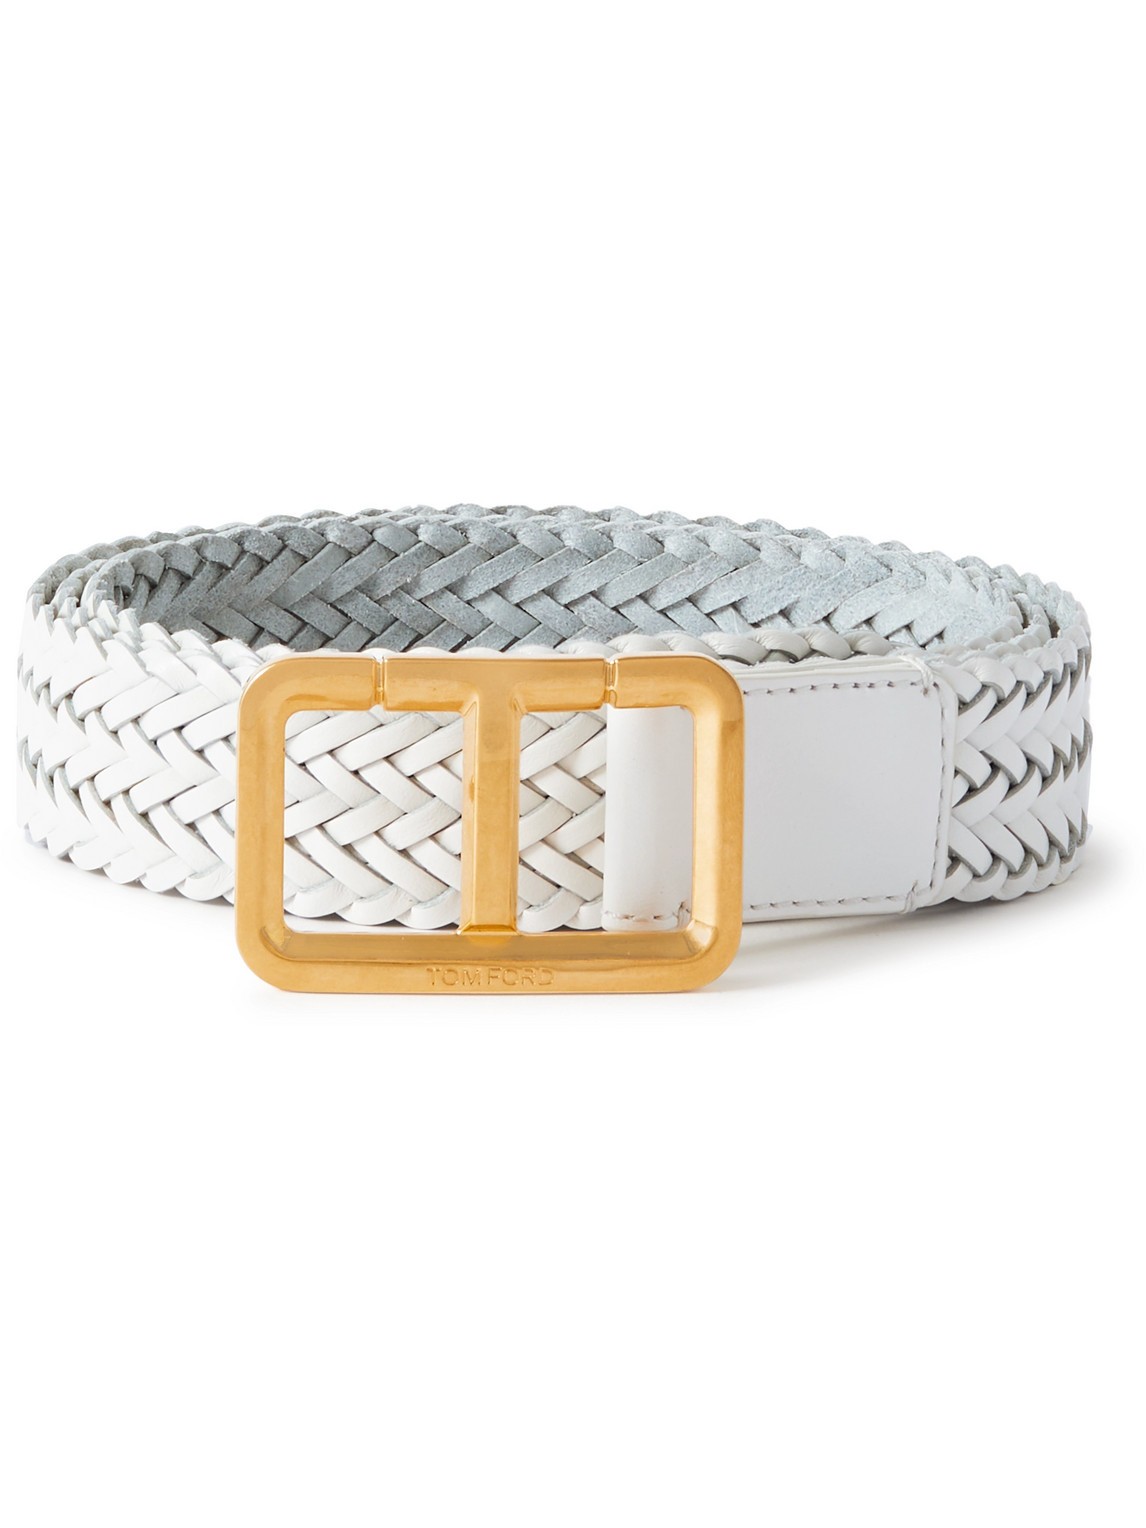 TOM FORD 3CM WOVEN LEATHER BELT